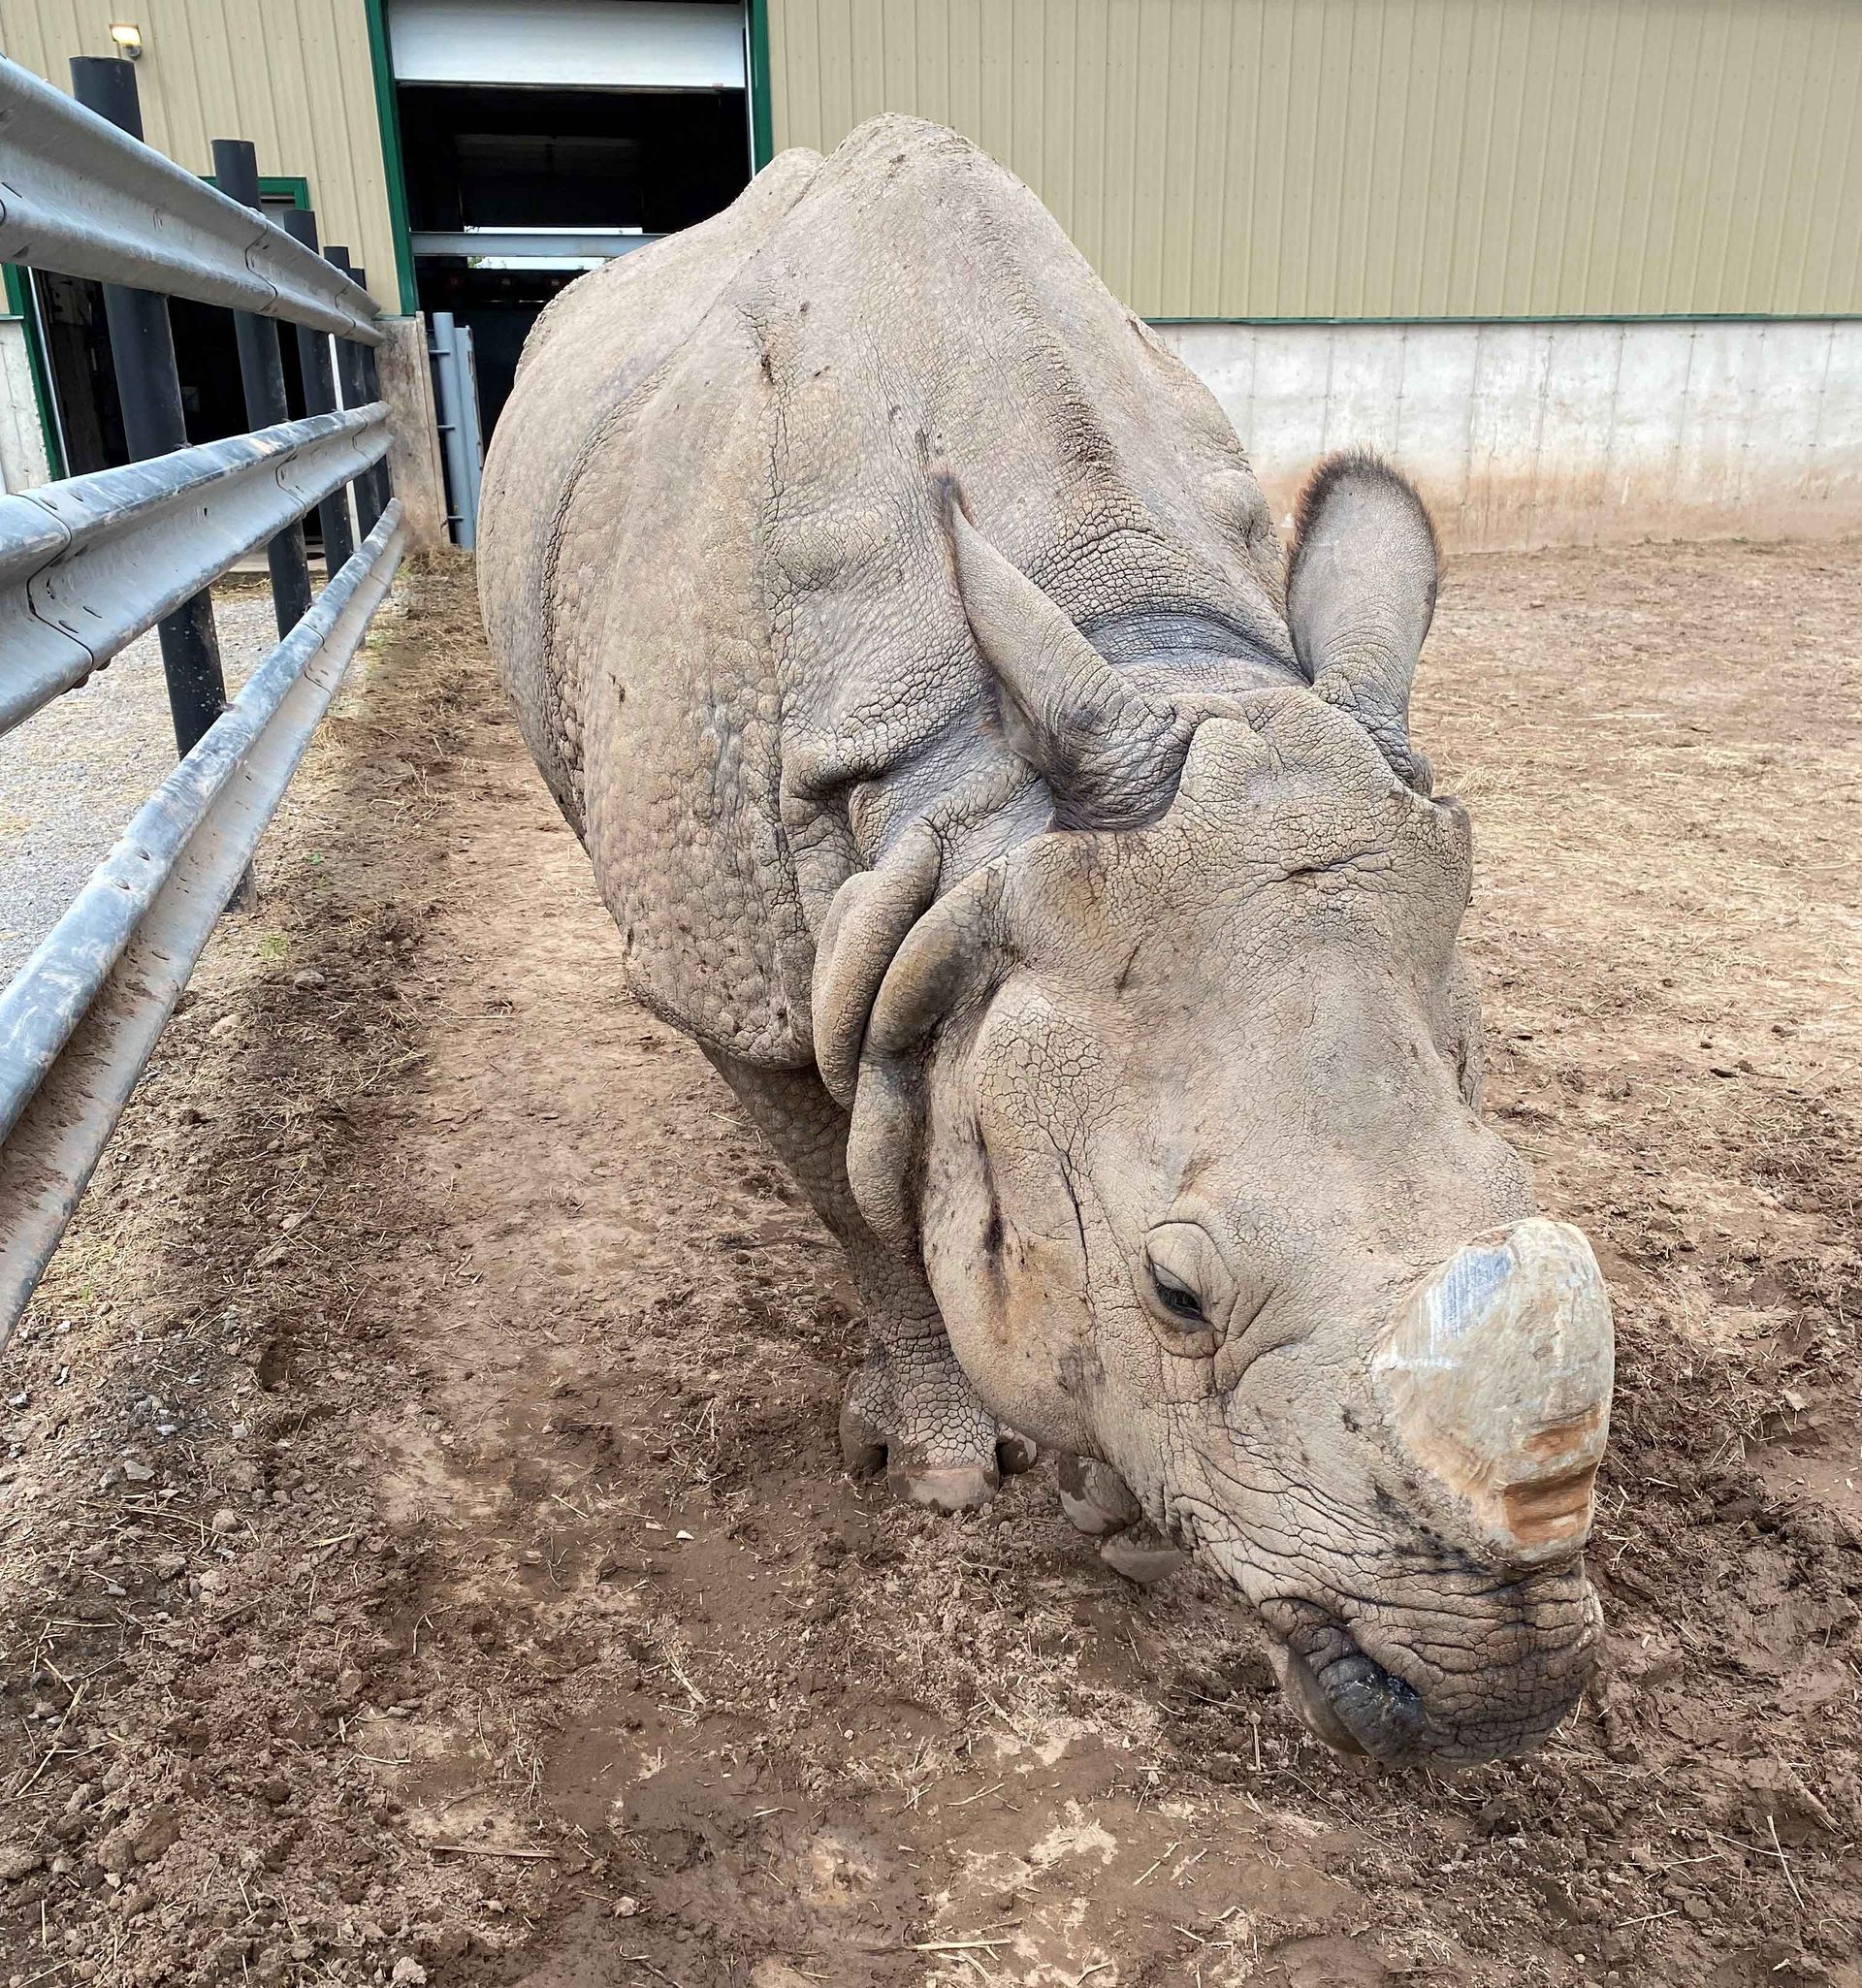 a rhino is standing in the dirt during a behind the scenes experience at safari niagara, a zoo in niagara falls